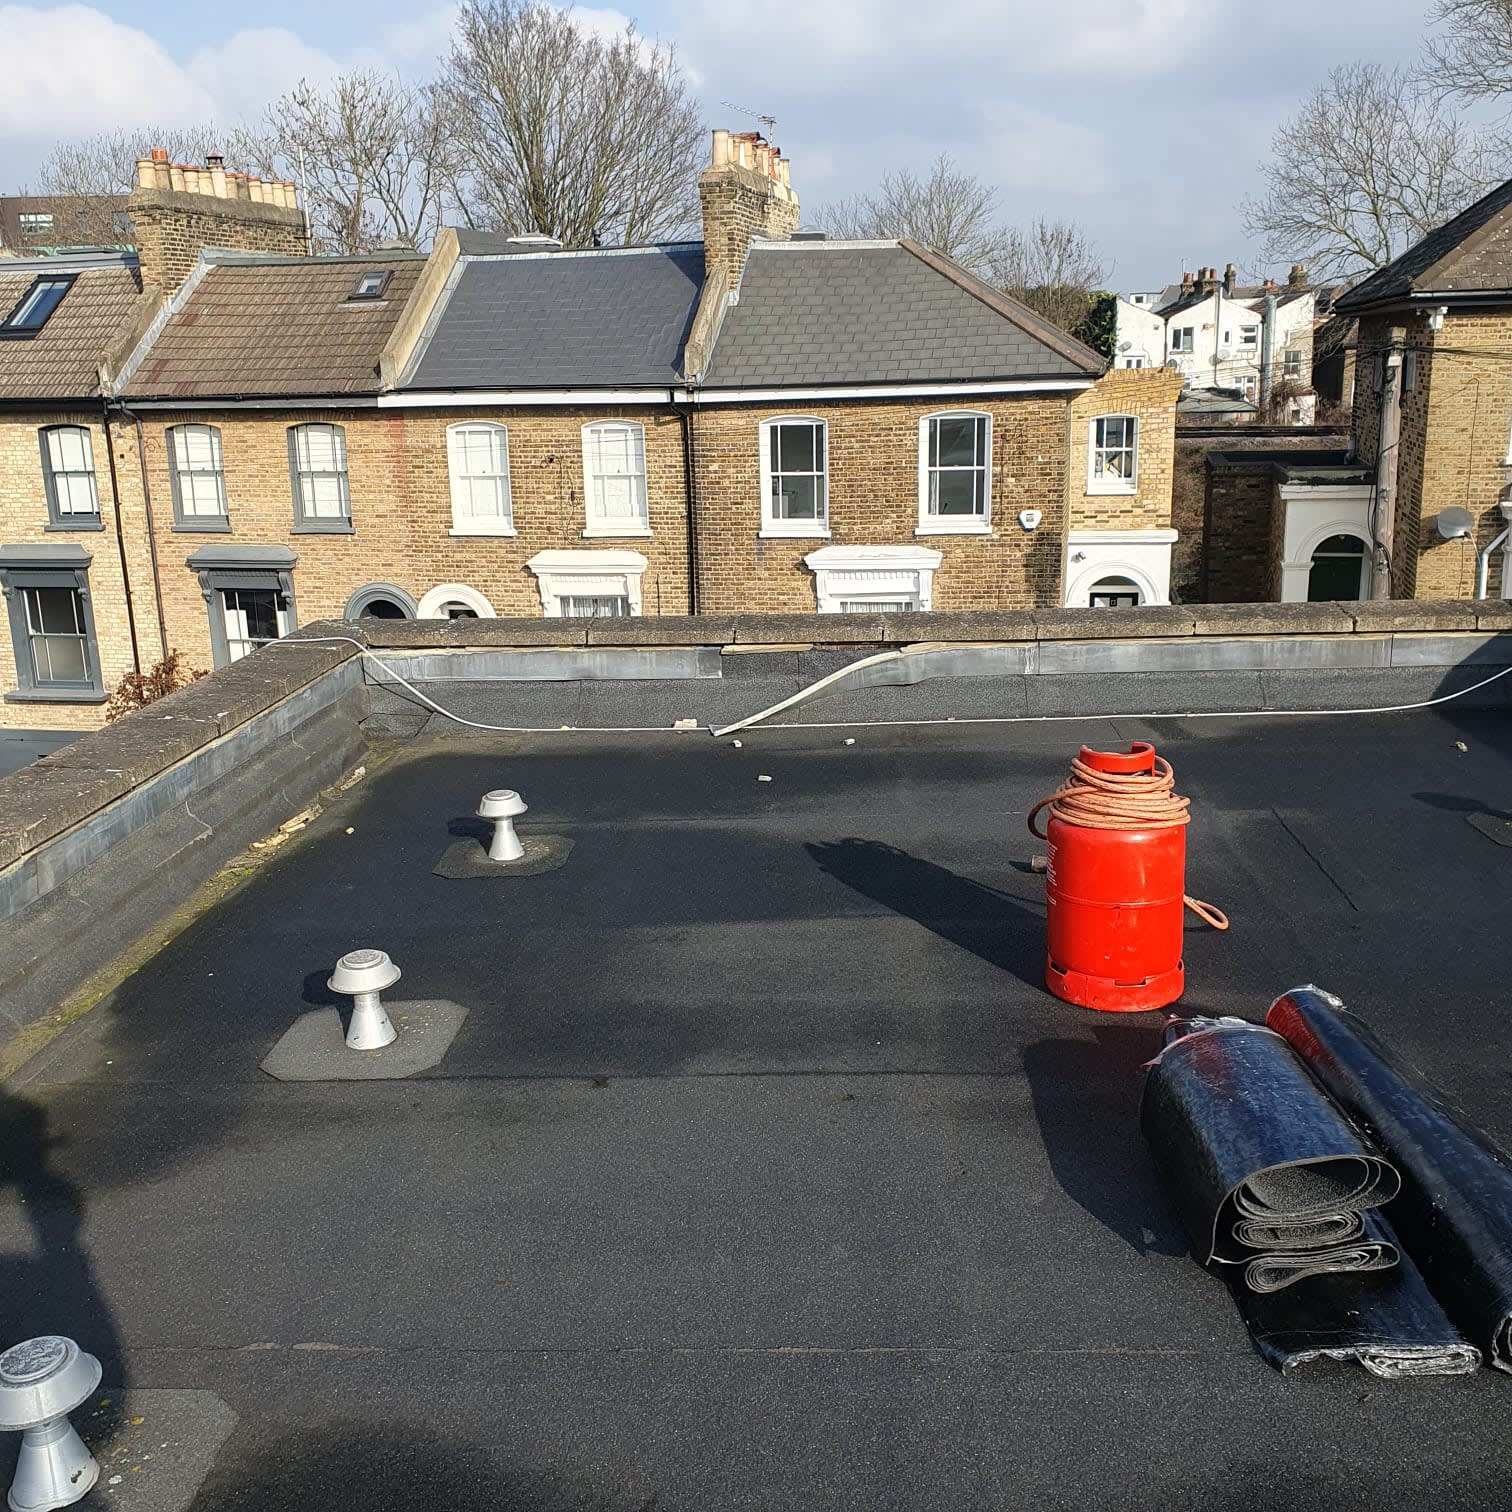 Images MP Roofing Services Ltd